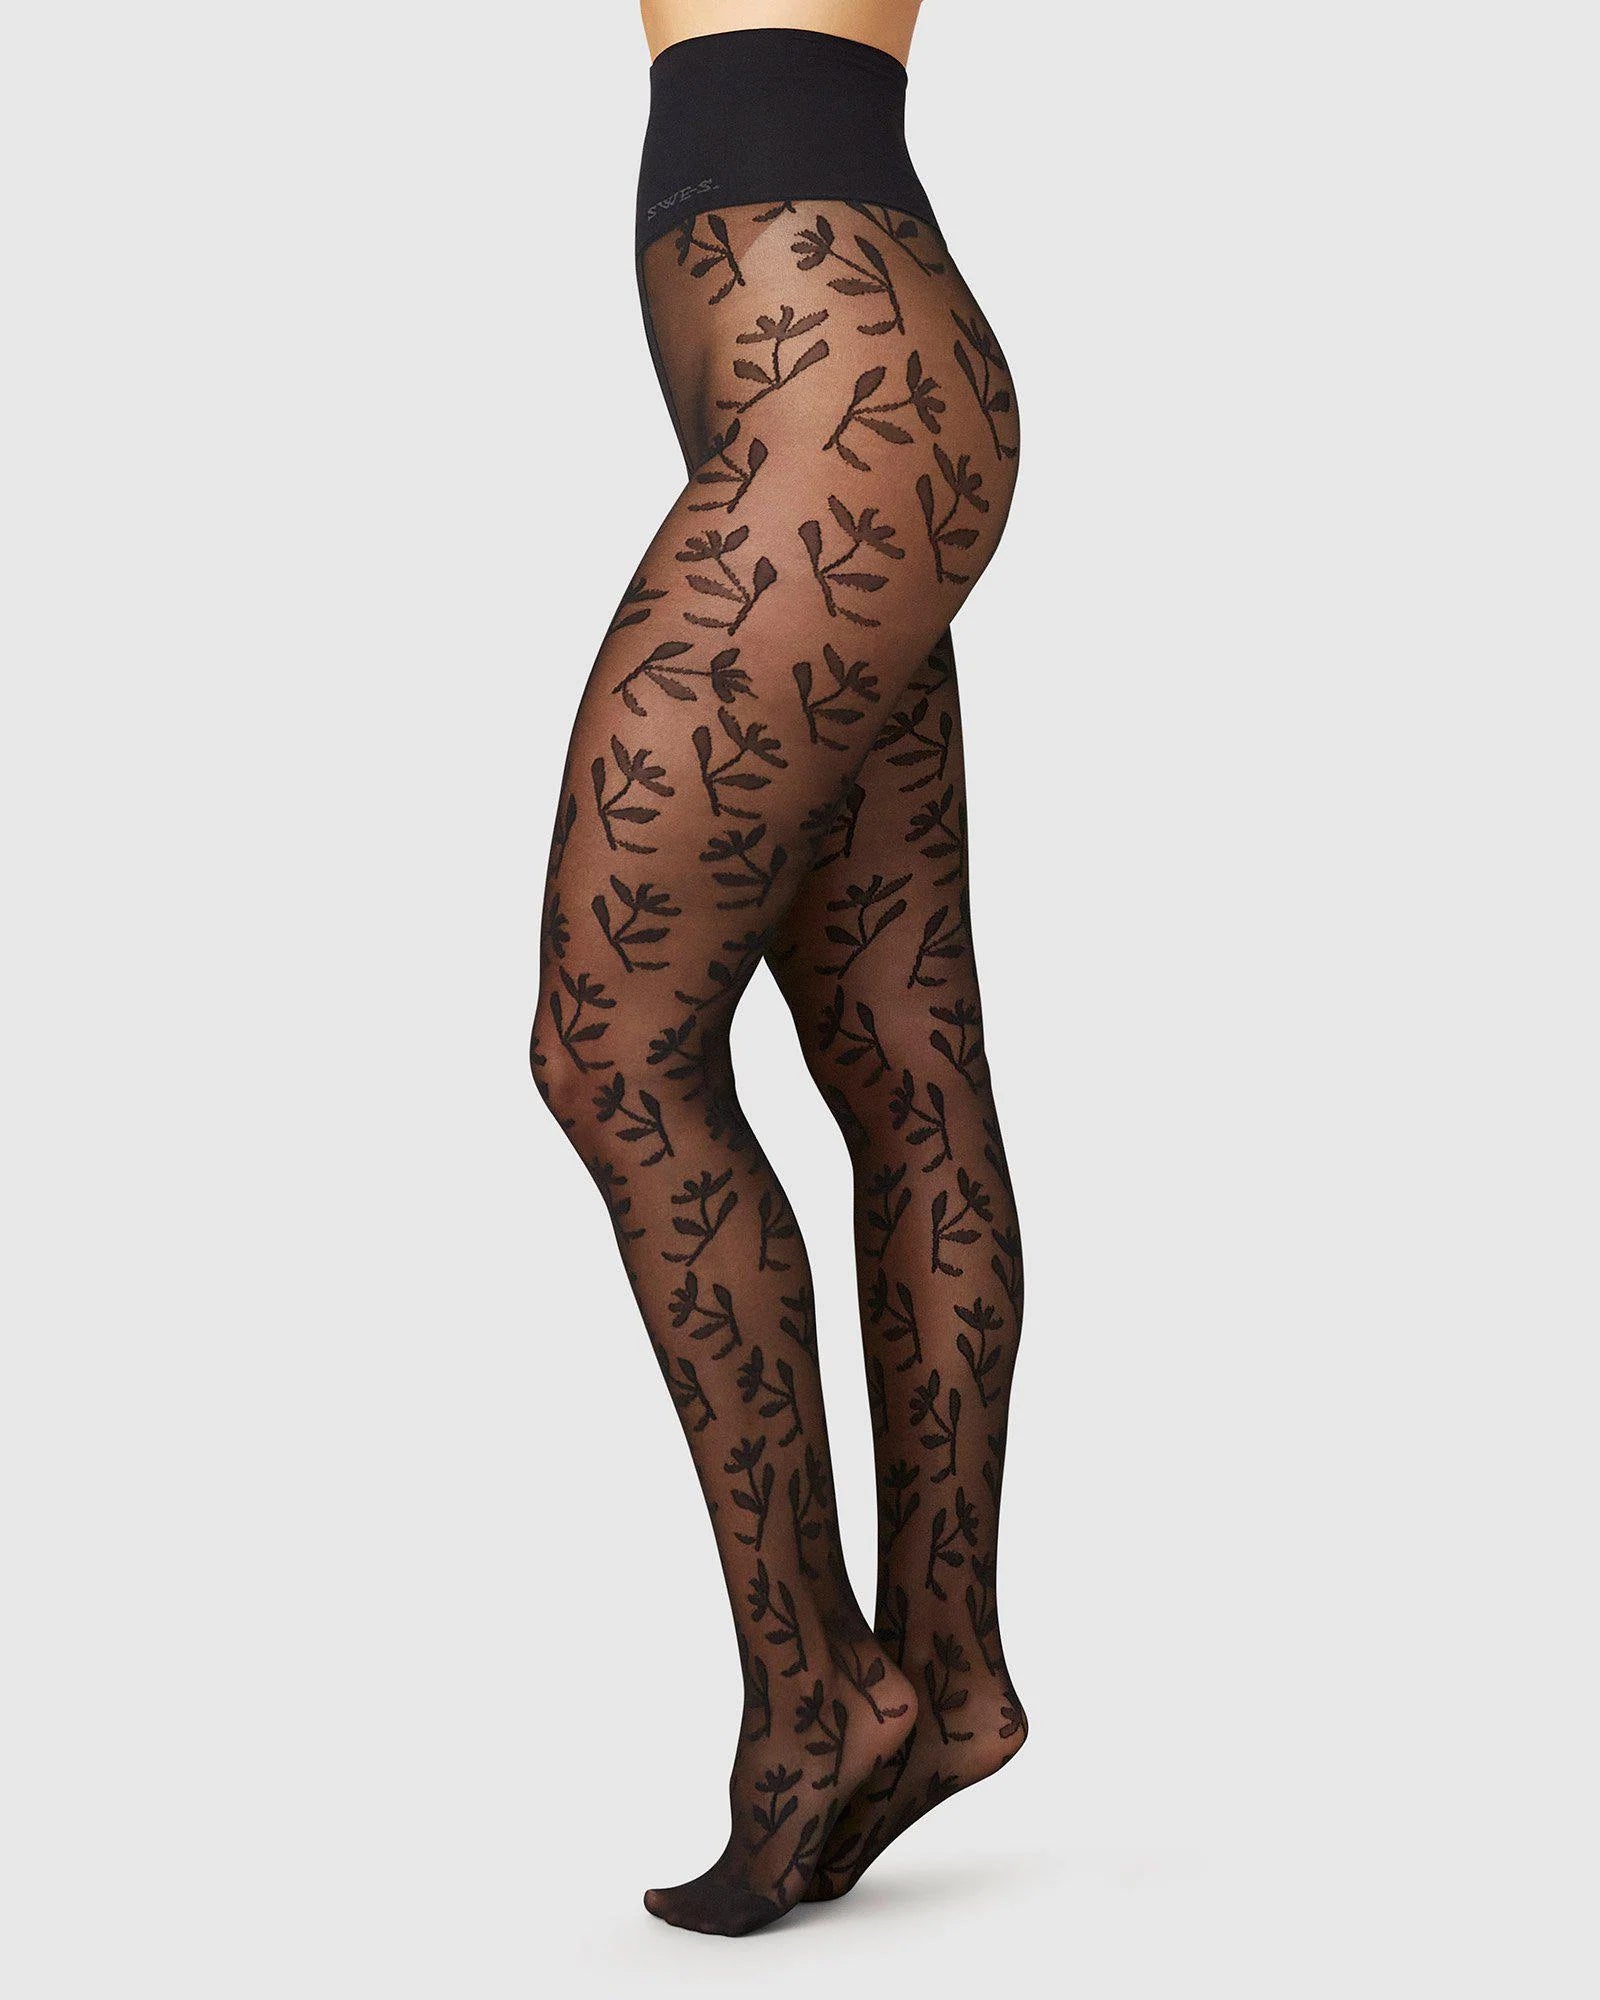 The FAIR Shop Swedish Stockings - Flora Flower Tights In Black